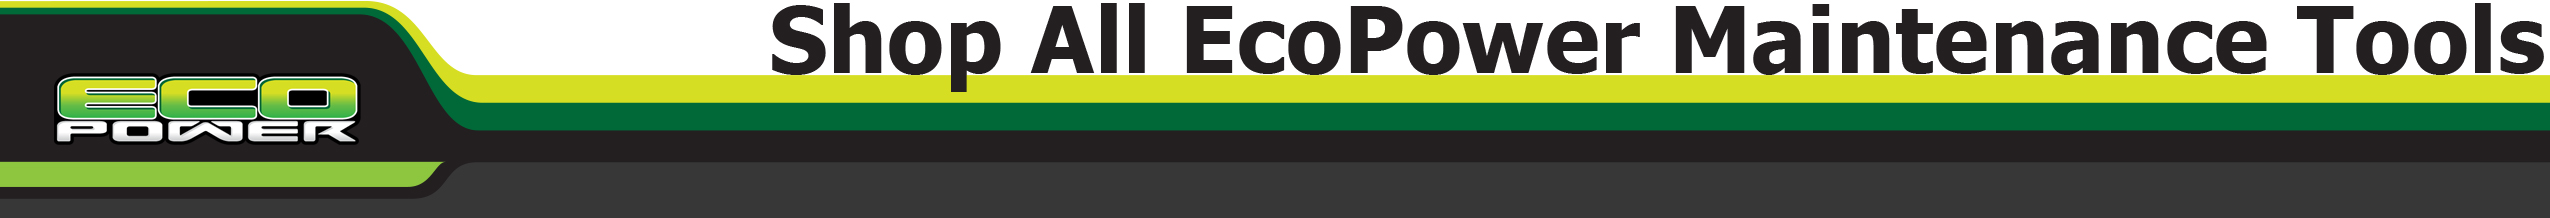 Shop All EcoPower Tools